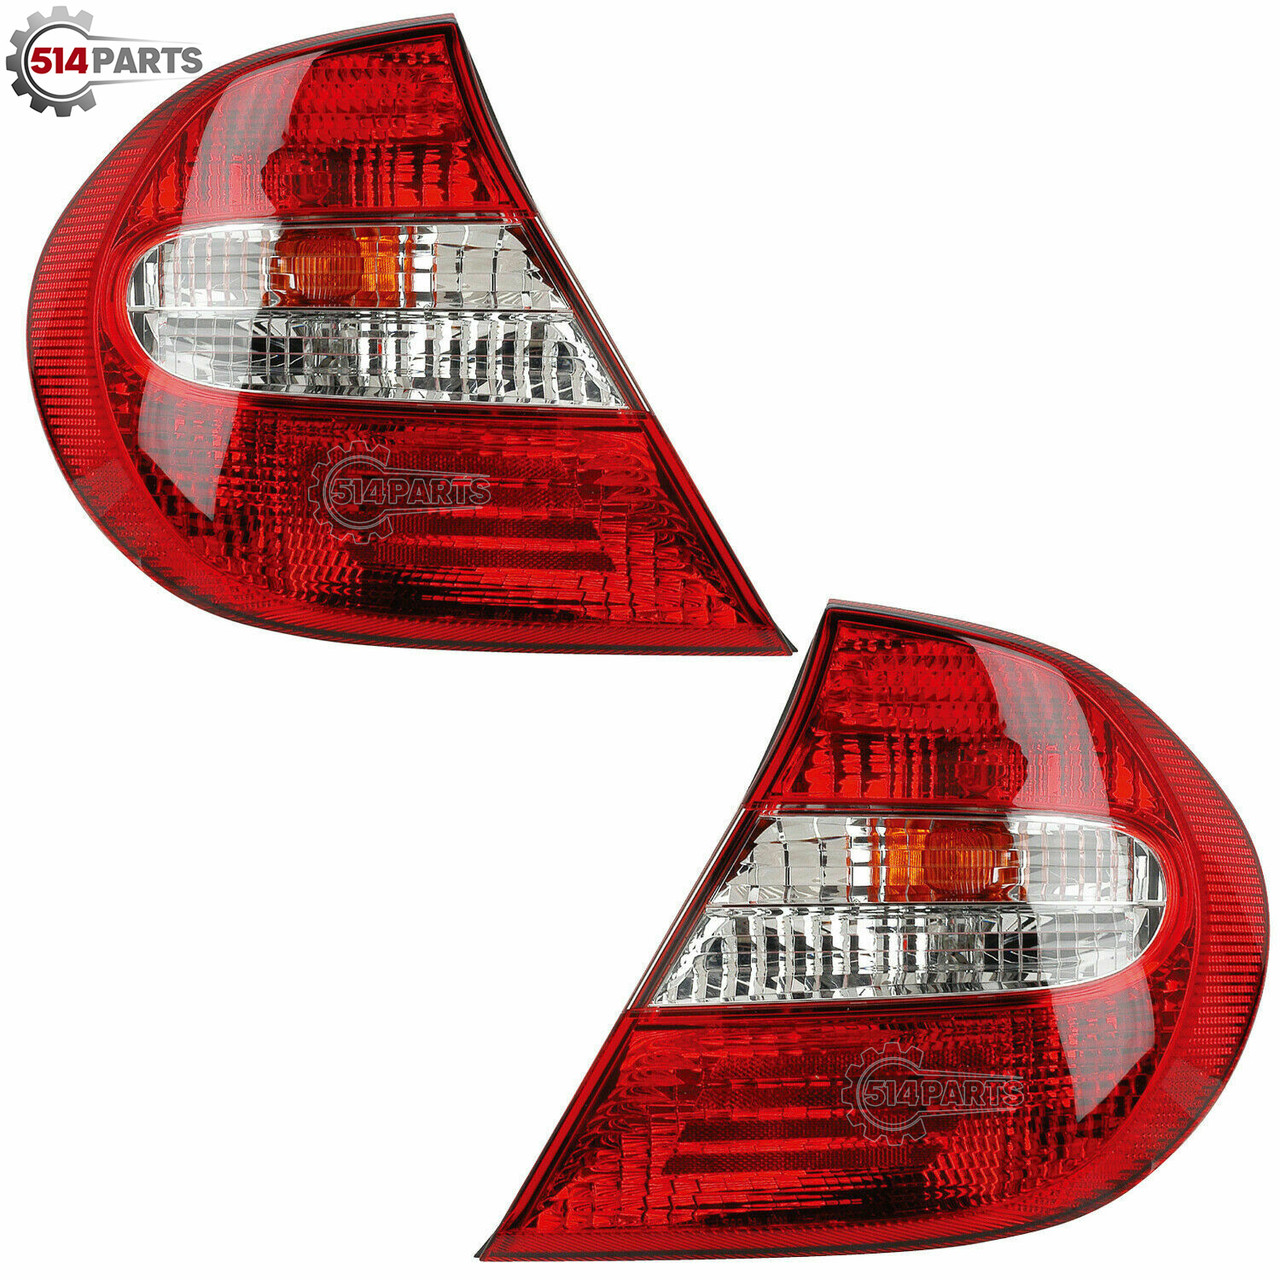 2002 - 2004 TOYOTA CAMRY LE/XLE/SE TAIL LIGHTS High Quality - PHARES ARRIERE Haute Qualite